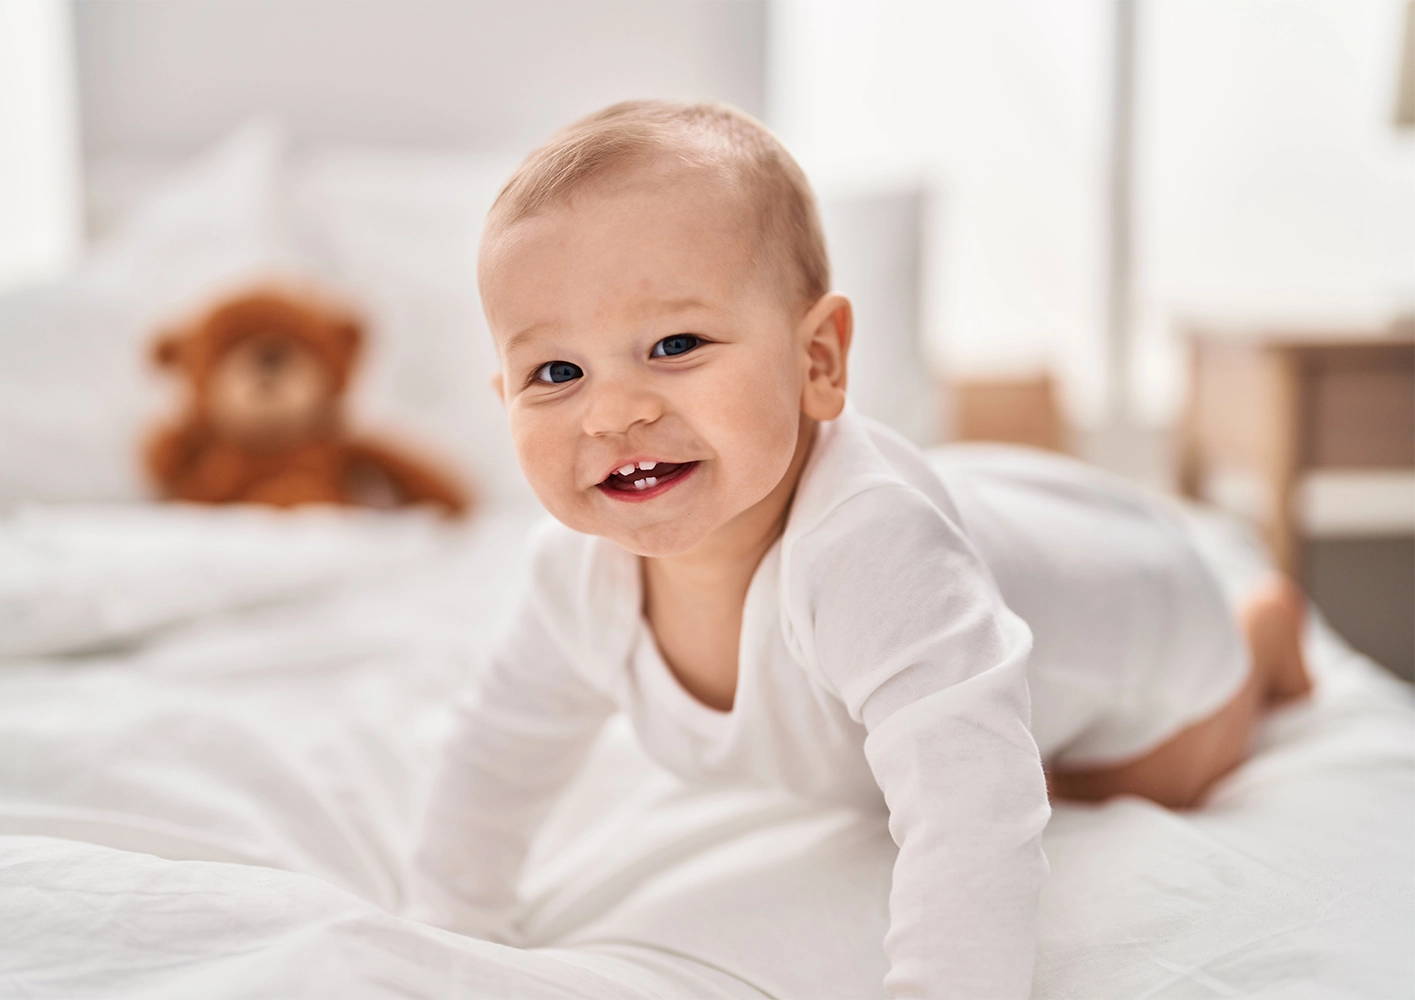 Find Out Monthly Birth Facts About Your Baby